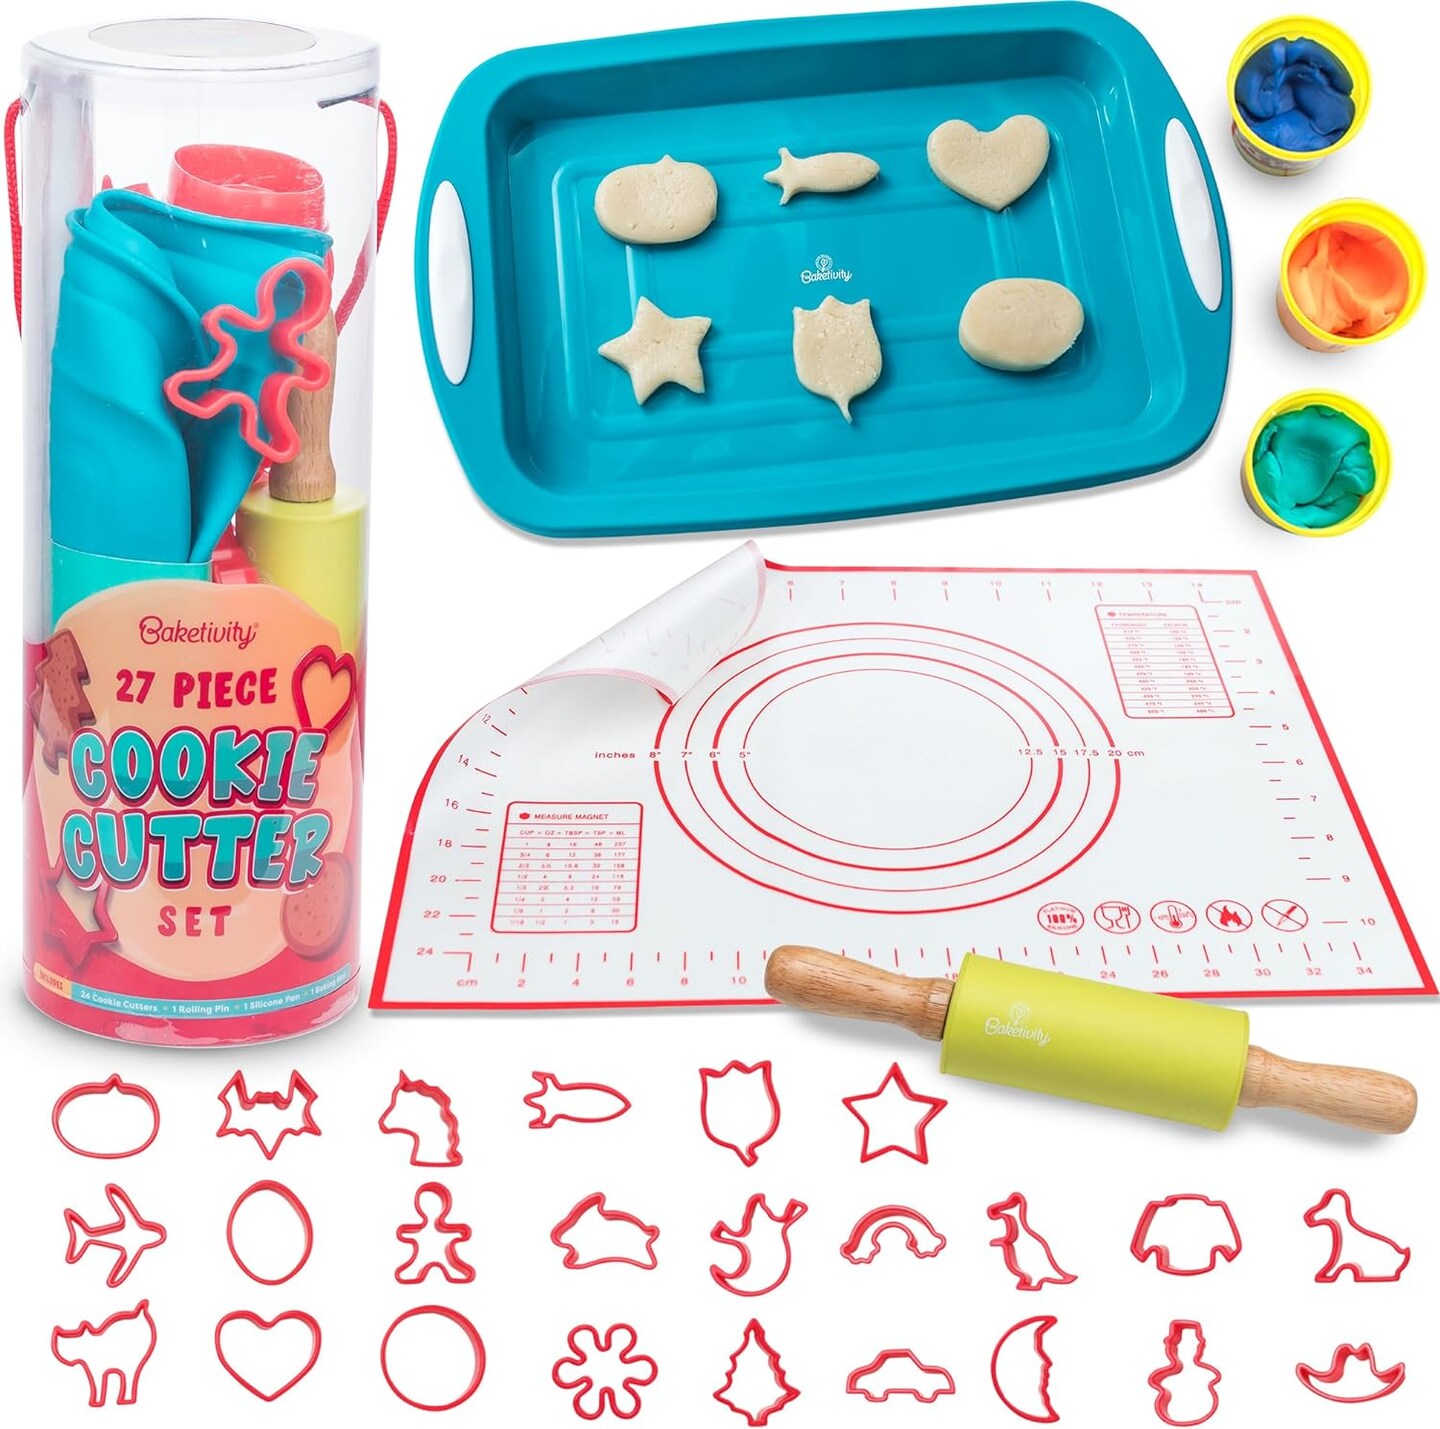 Baketivity Cookie Cutter Set For Kids, 24 Assorted Cookie Cutters of Basic Shapes, Seasonal, and Holiday Themes - With Rolling Pin, Silicone Baking Pan, and Non-Stick Baking Mat - BPA-Free - Ages 4+